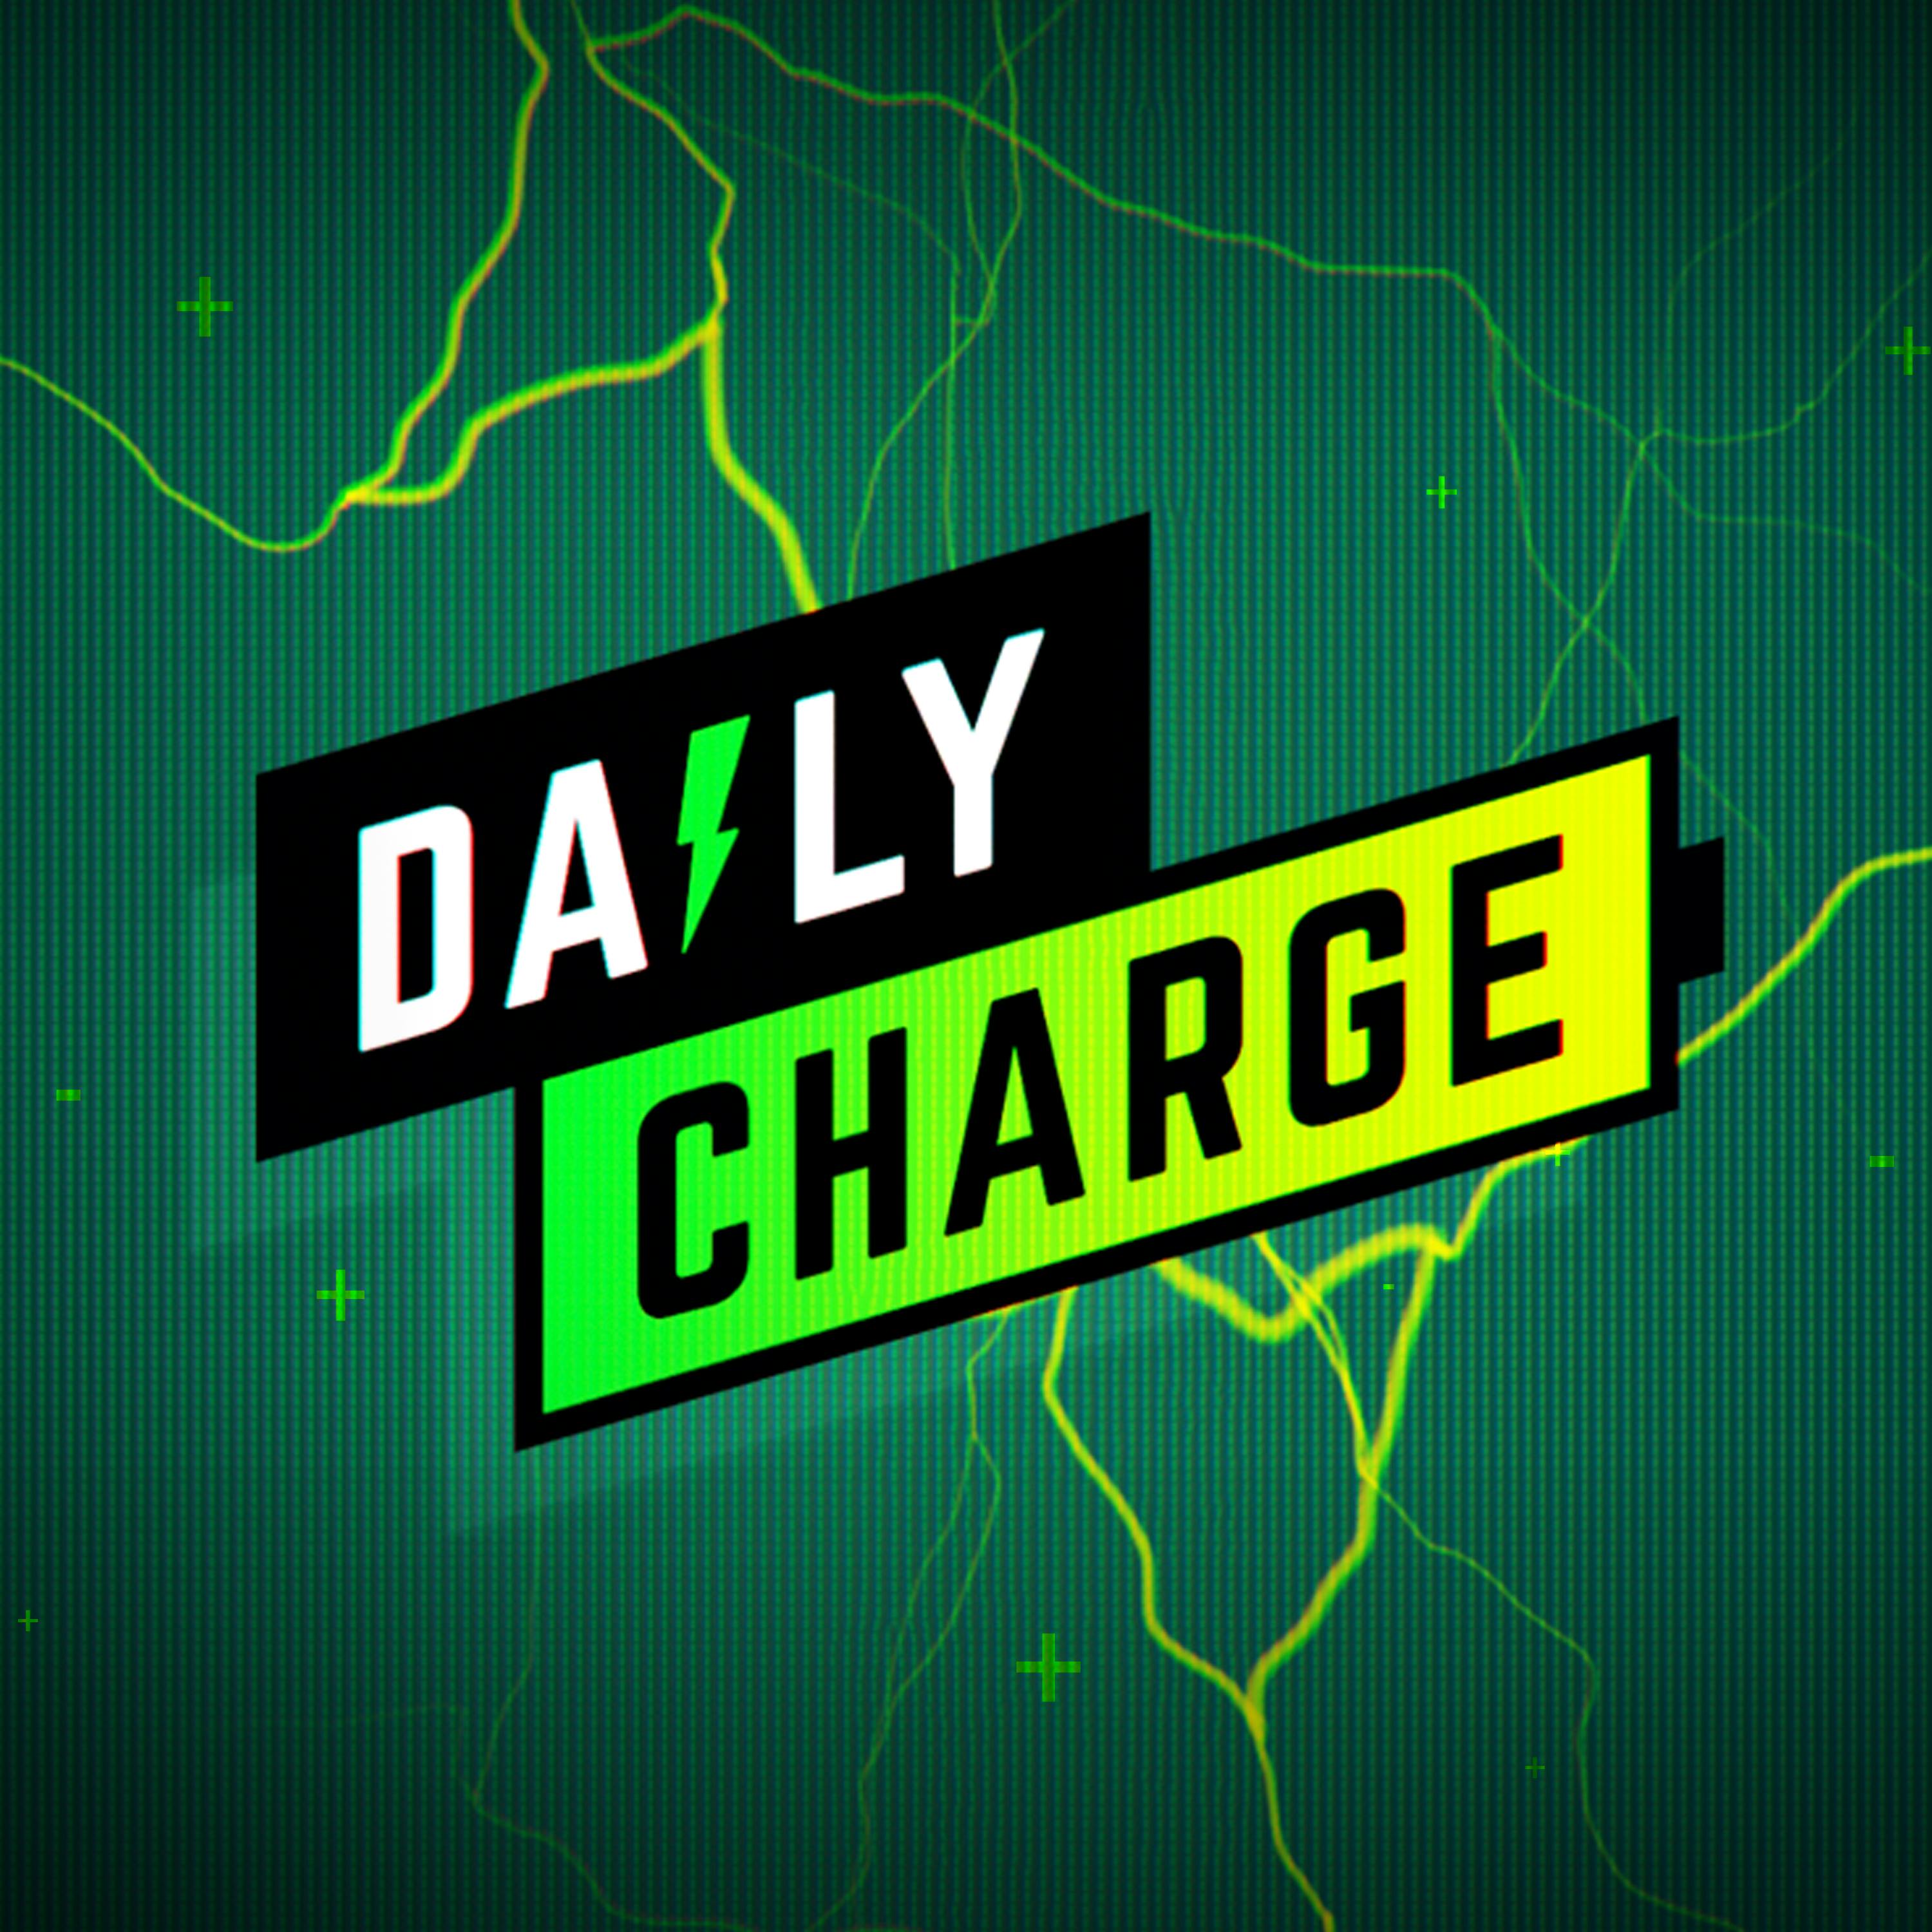 Here’s How the New IPadOS Feels Like (The Daily Charge, 7/15/2022)